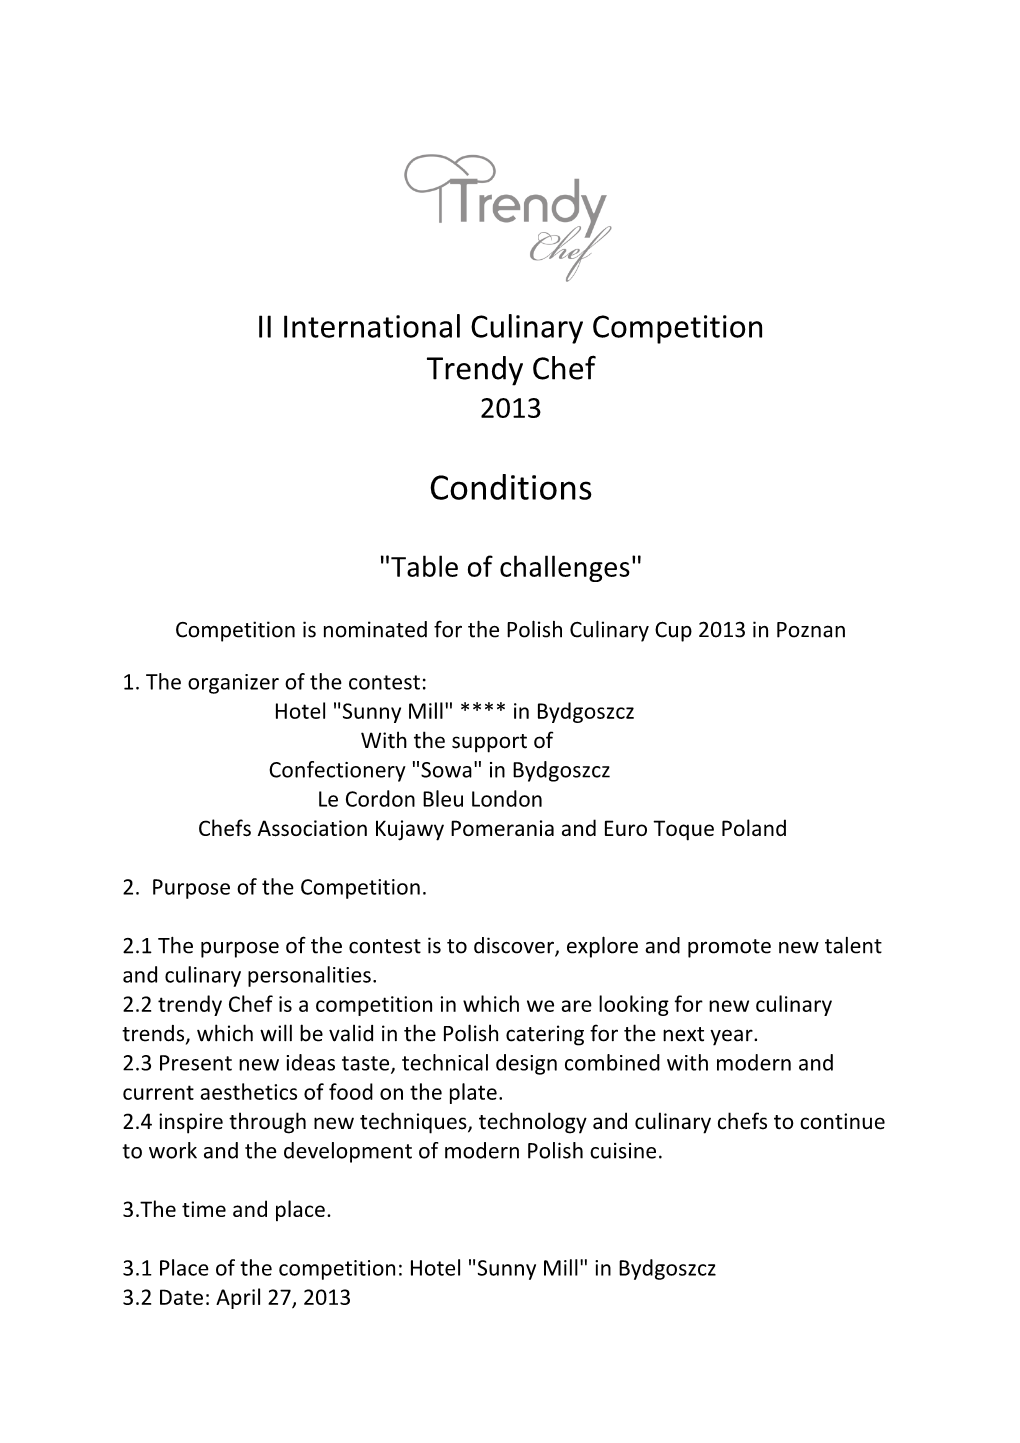 II International Culinary Competition Trendy Chef 2013